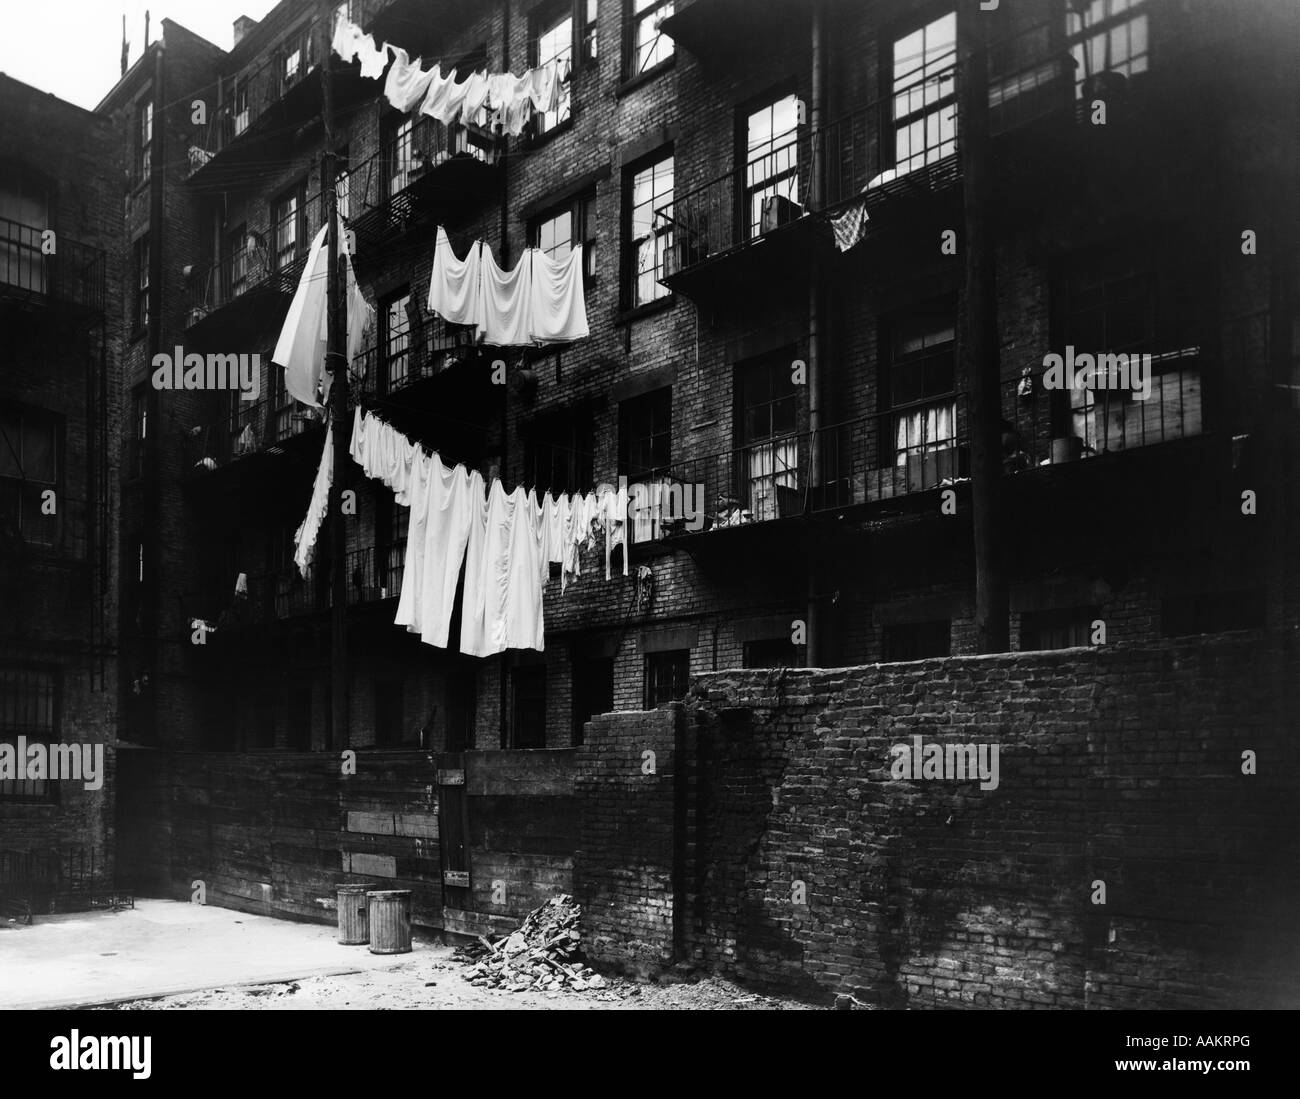 1930s BACK OF TENEMENT HOUSING WITH LAUNDRY HANGING OUT ON CLOTHESLINE Stock Photo